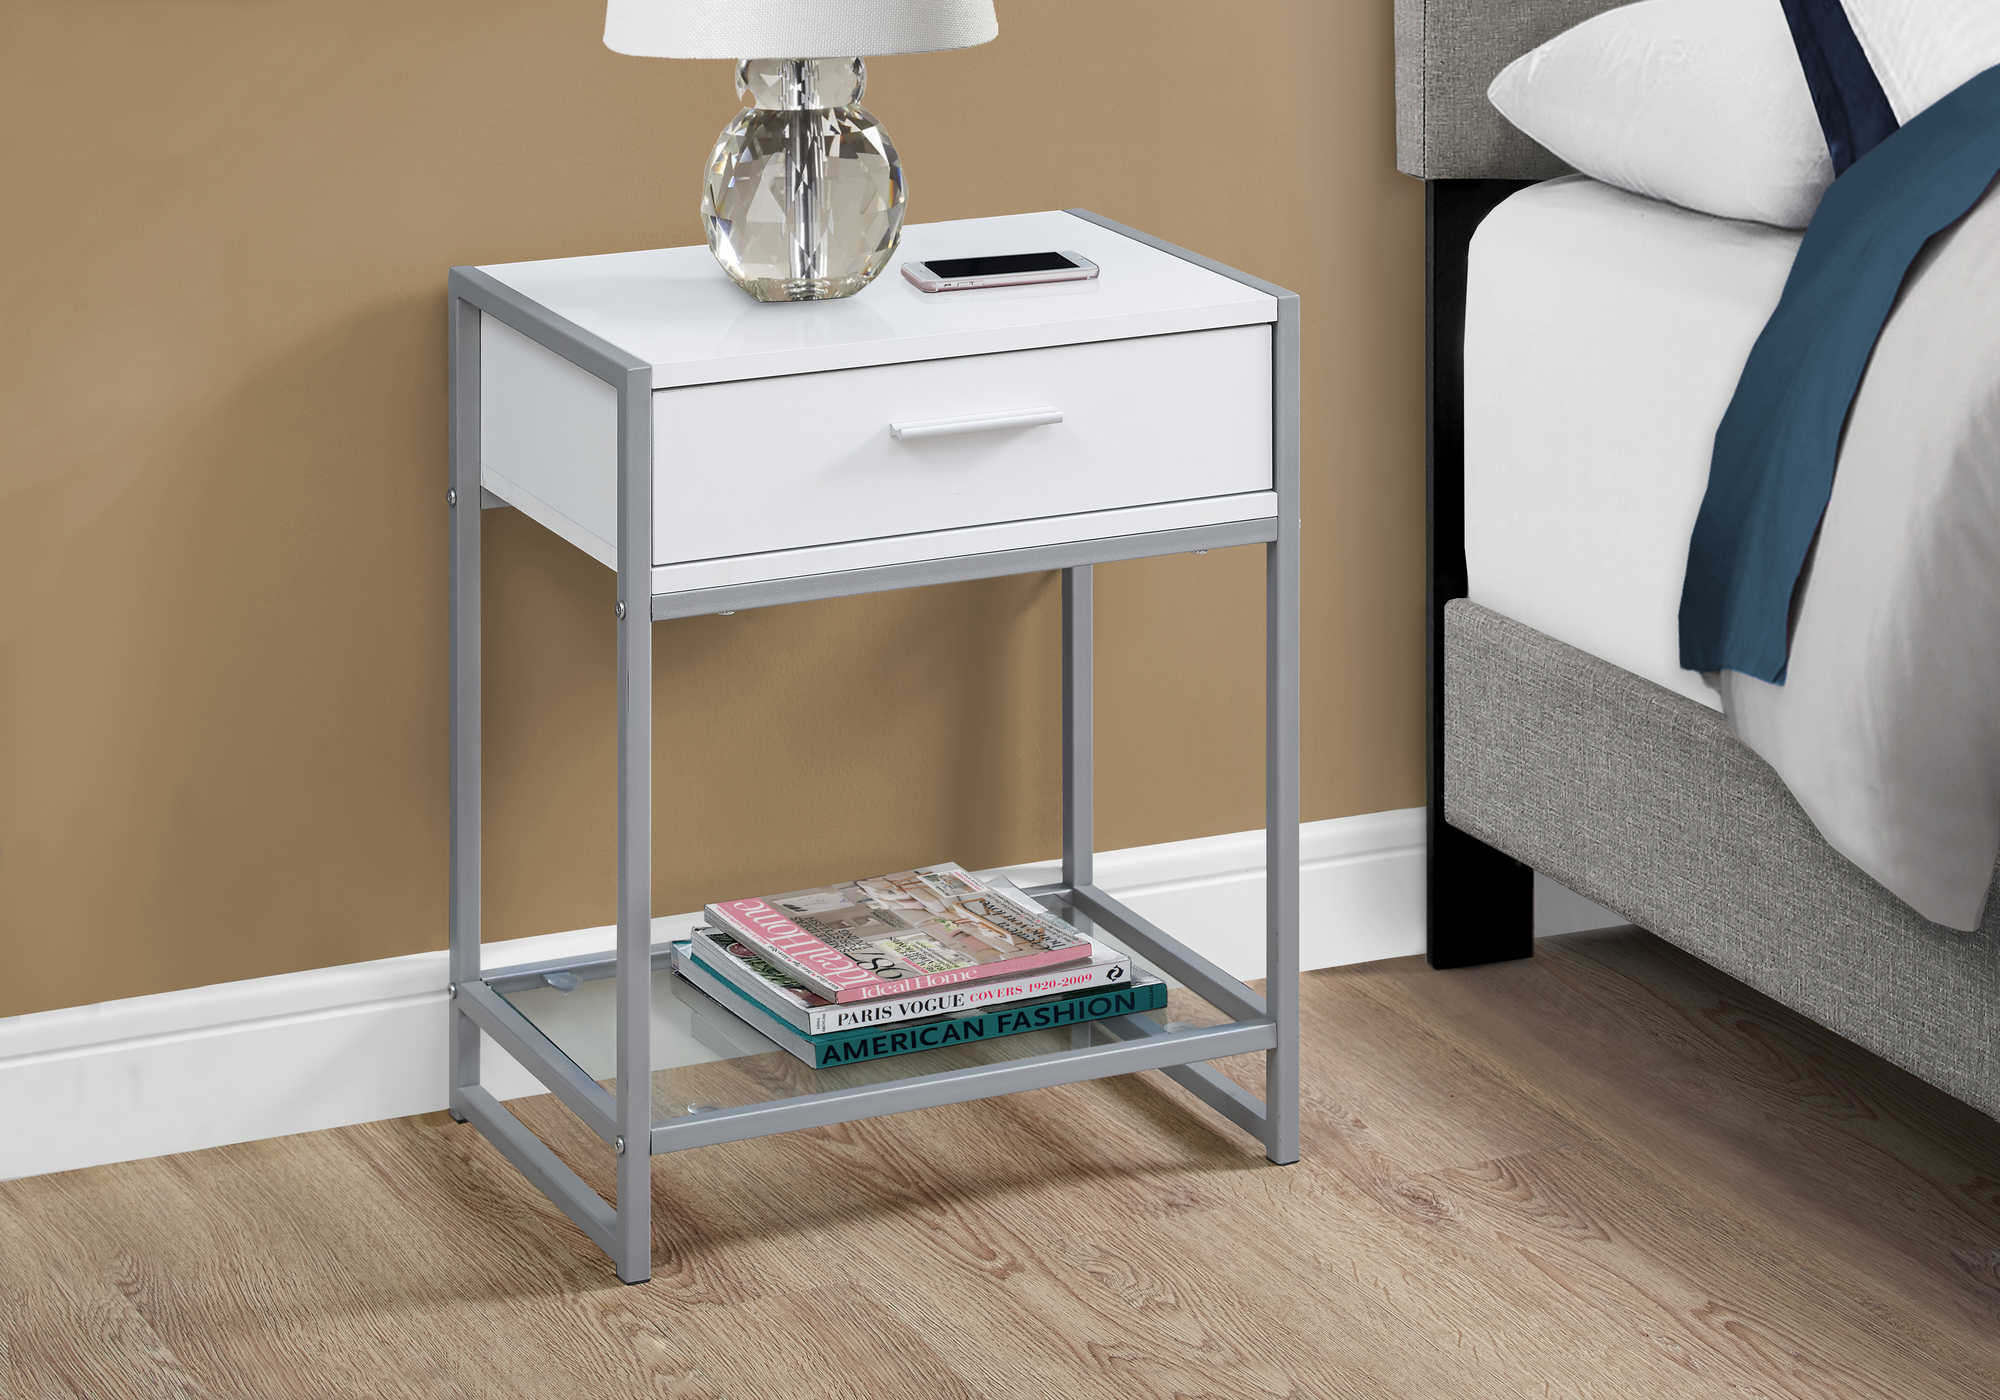 NIGHT STAND - 22"H / WHITE/ SILVER METAL/ TEMPERED GLASS